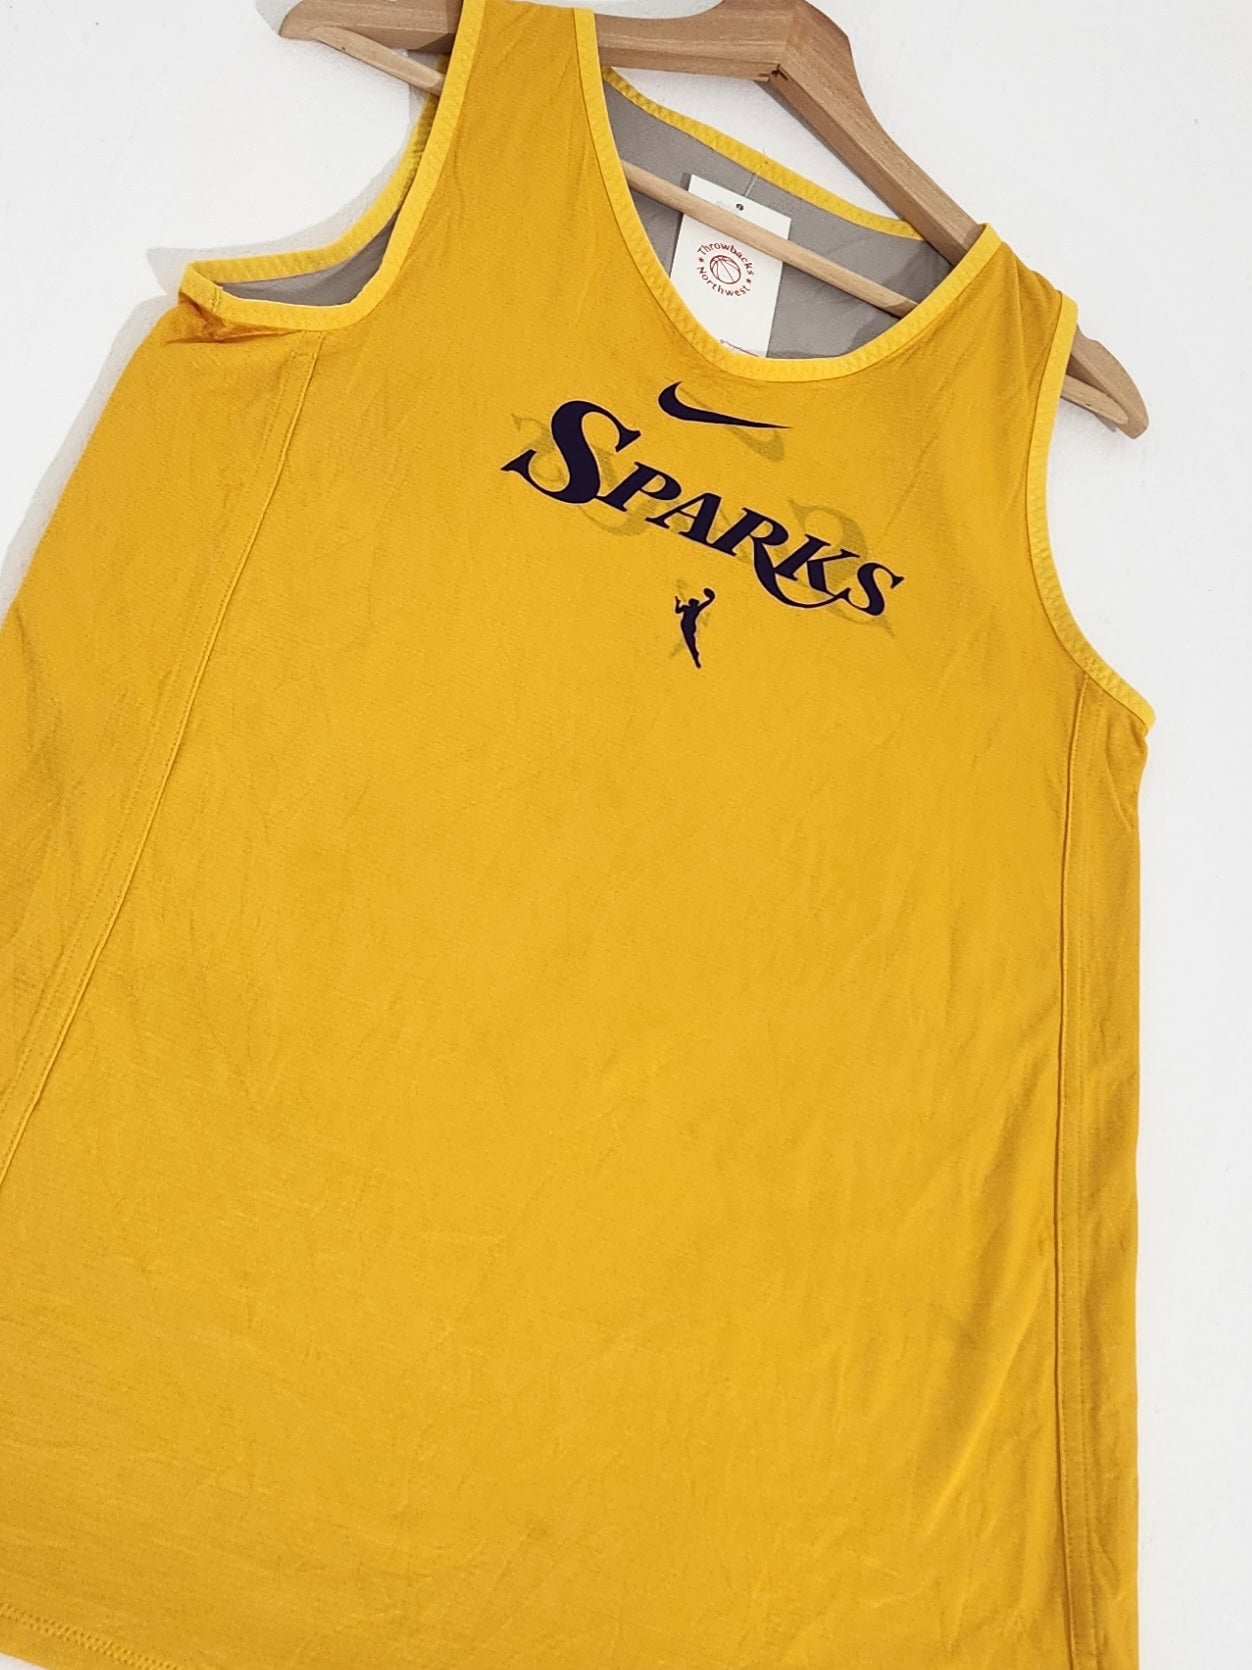 Nike, Tops, Los Angeles Sparks Jersey